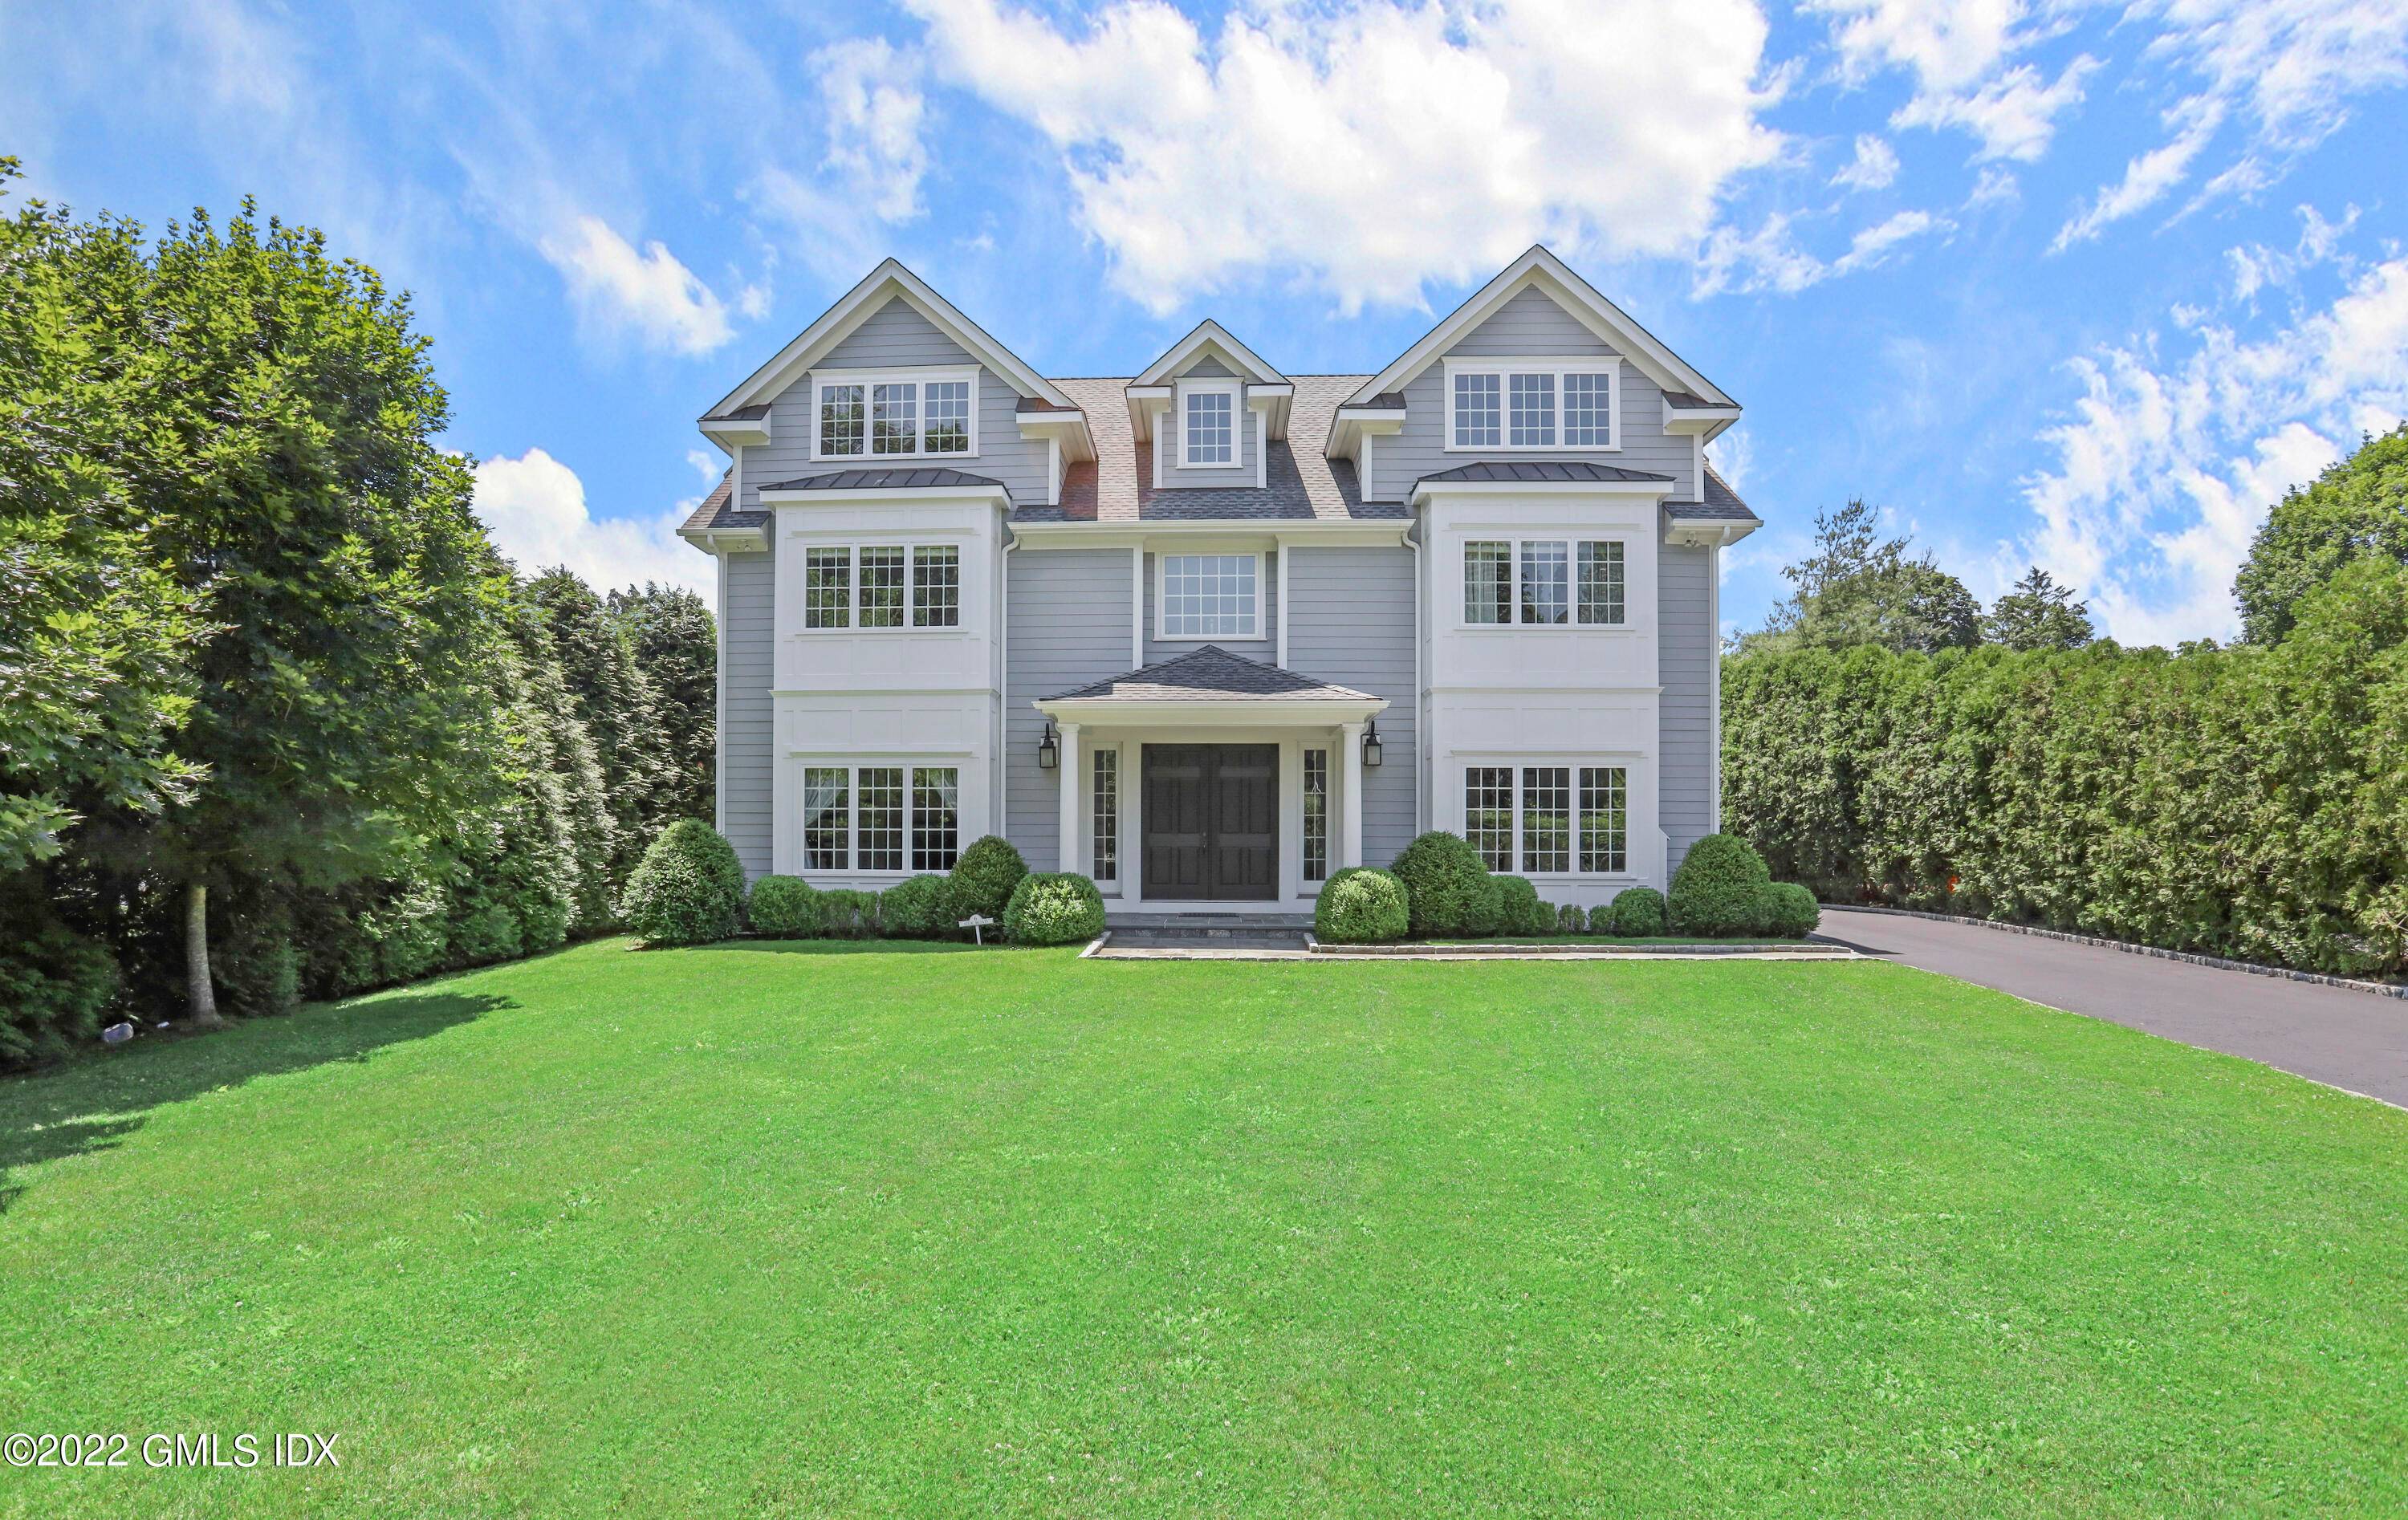 Classic elegance defines this stunning four bedroom Colonial with stone terrace and secluded backyard on.